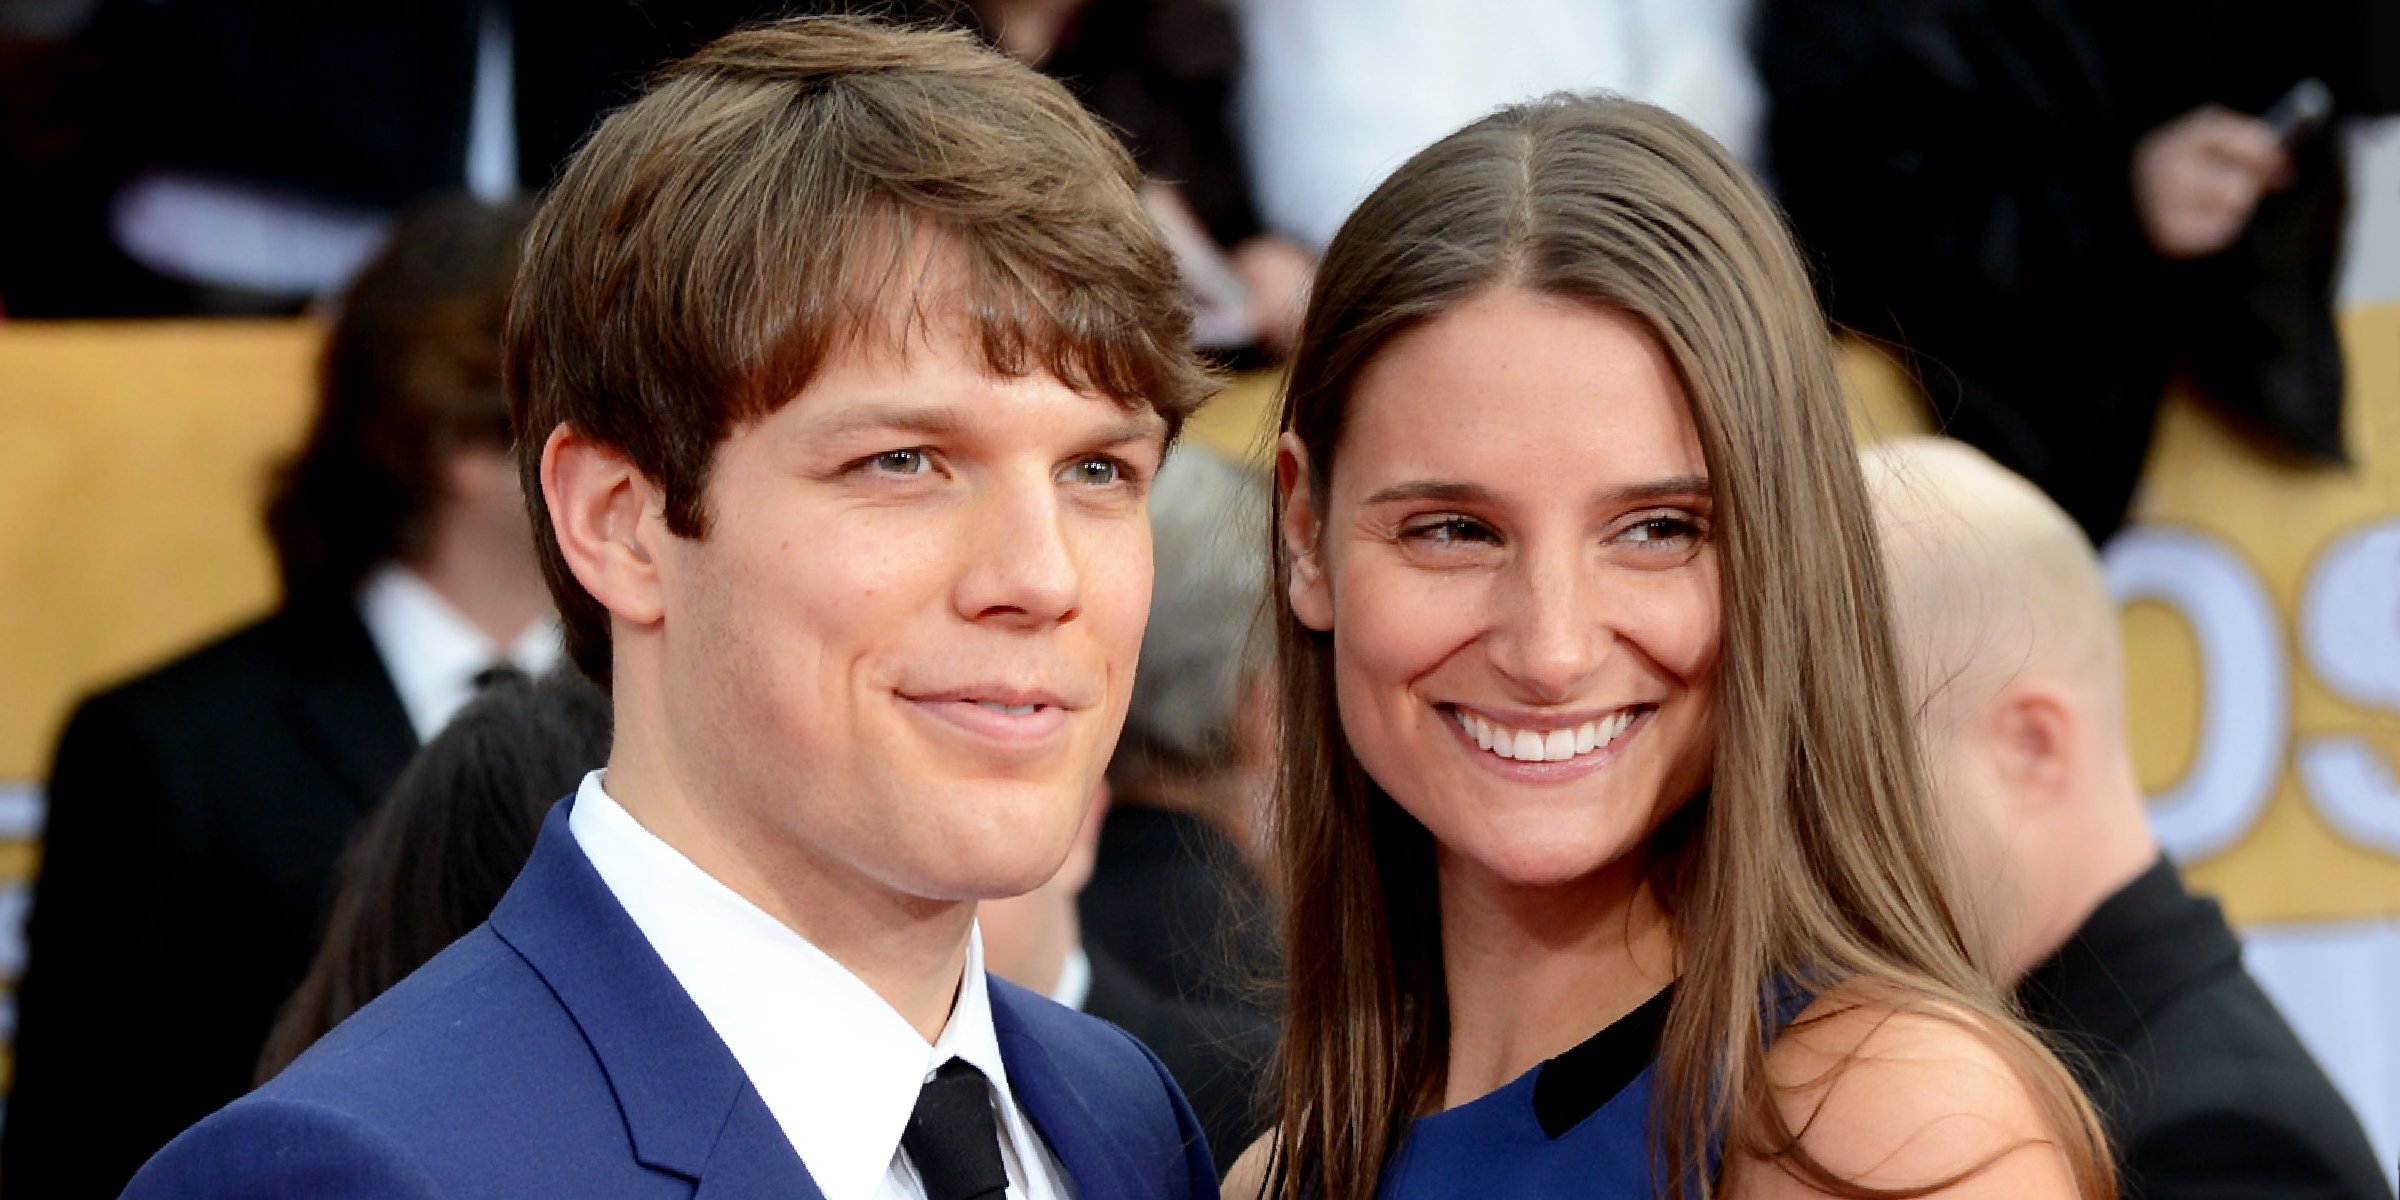 Jake Lacy and Lauren DeLeo Lacy | Source: Getty Images